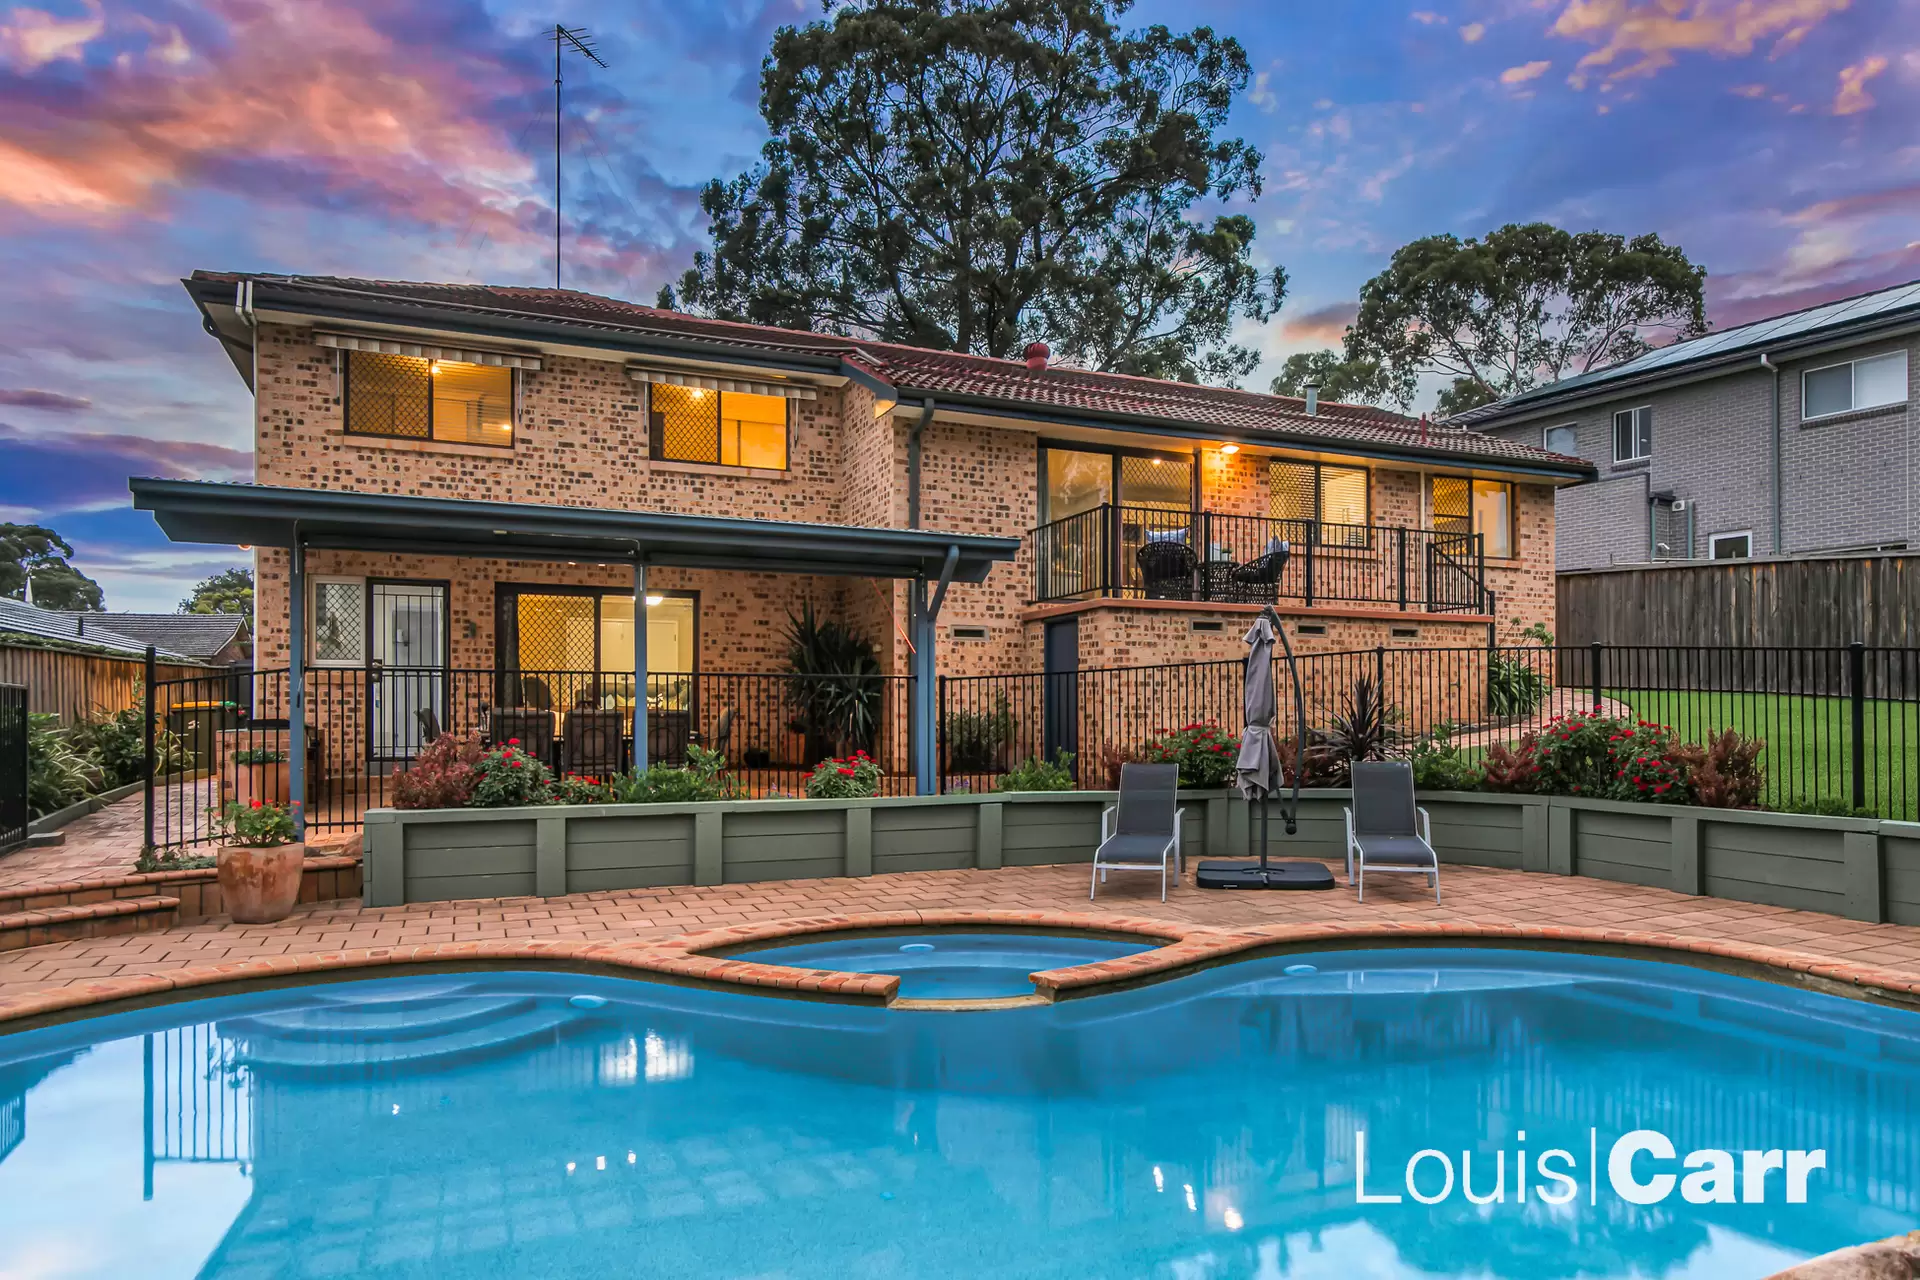 Photo #2: 59 Tallowwood Avenue, Cherrybrook - Sold by Louis Carr Real Estate